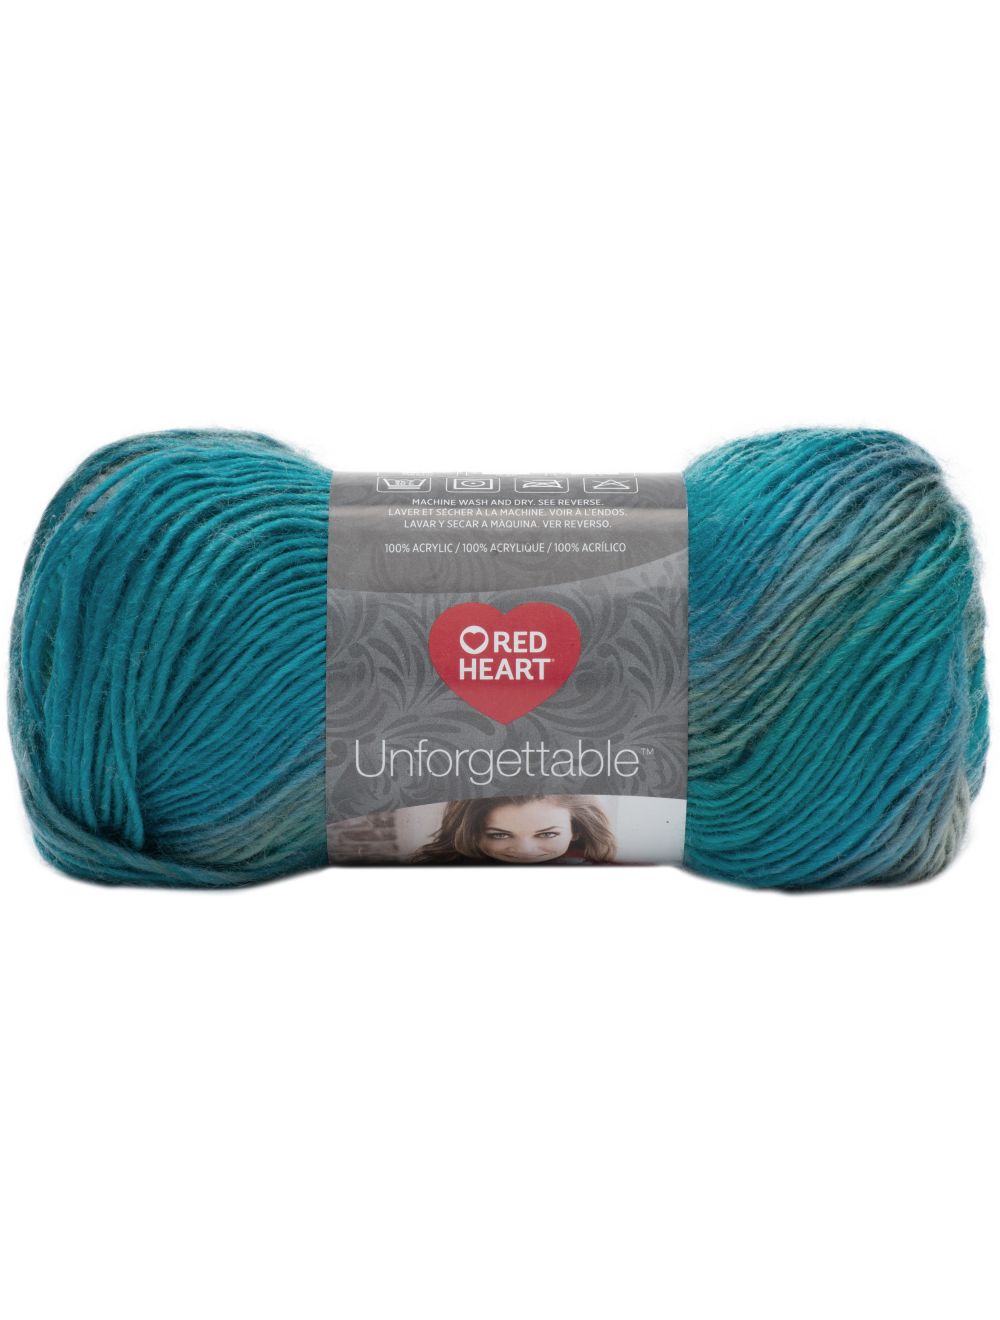 RED HEART Boutique Unforgettable Yarn, Tidal